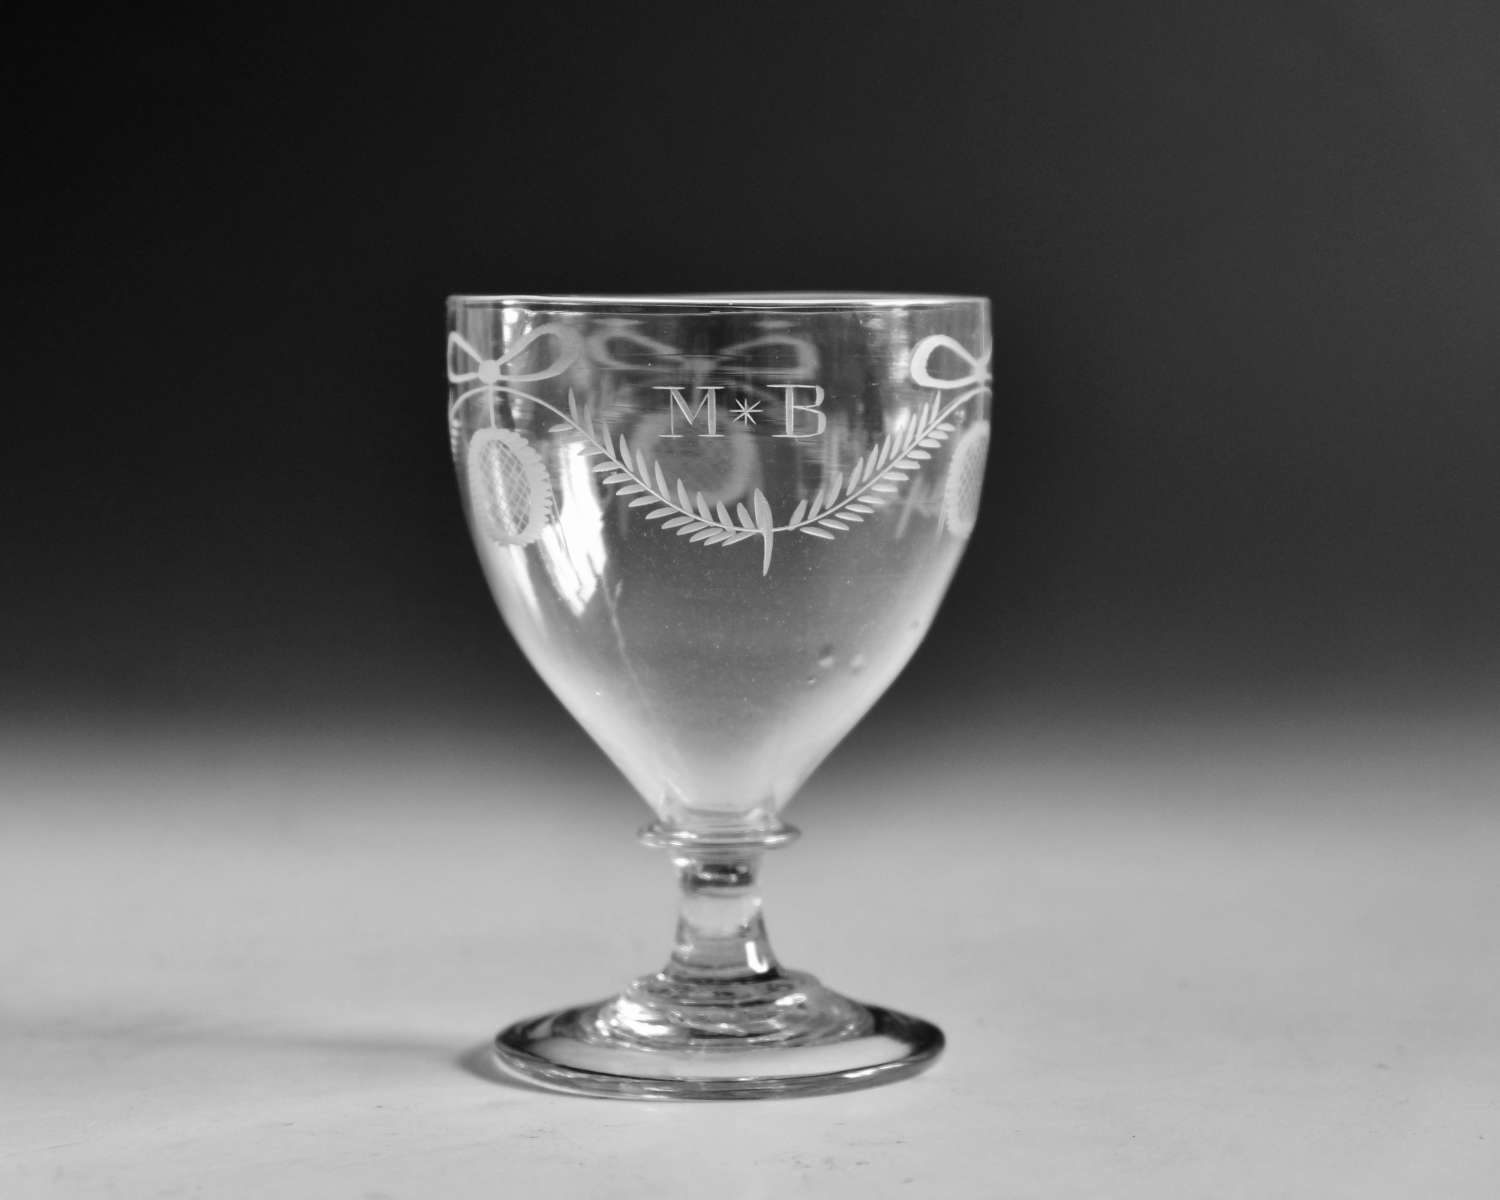 Antique glass rummer engraved English c1800